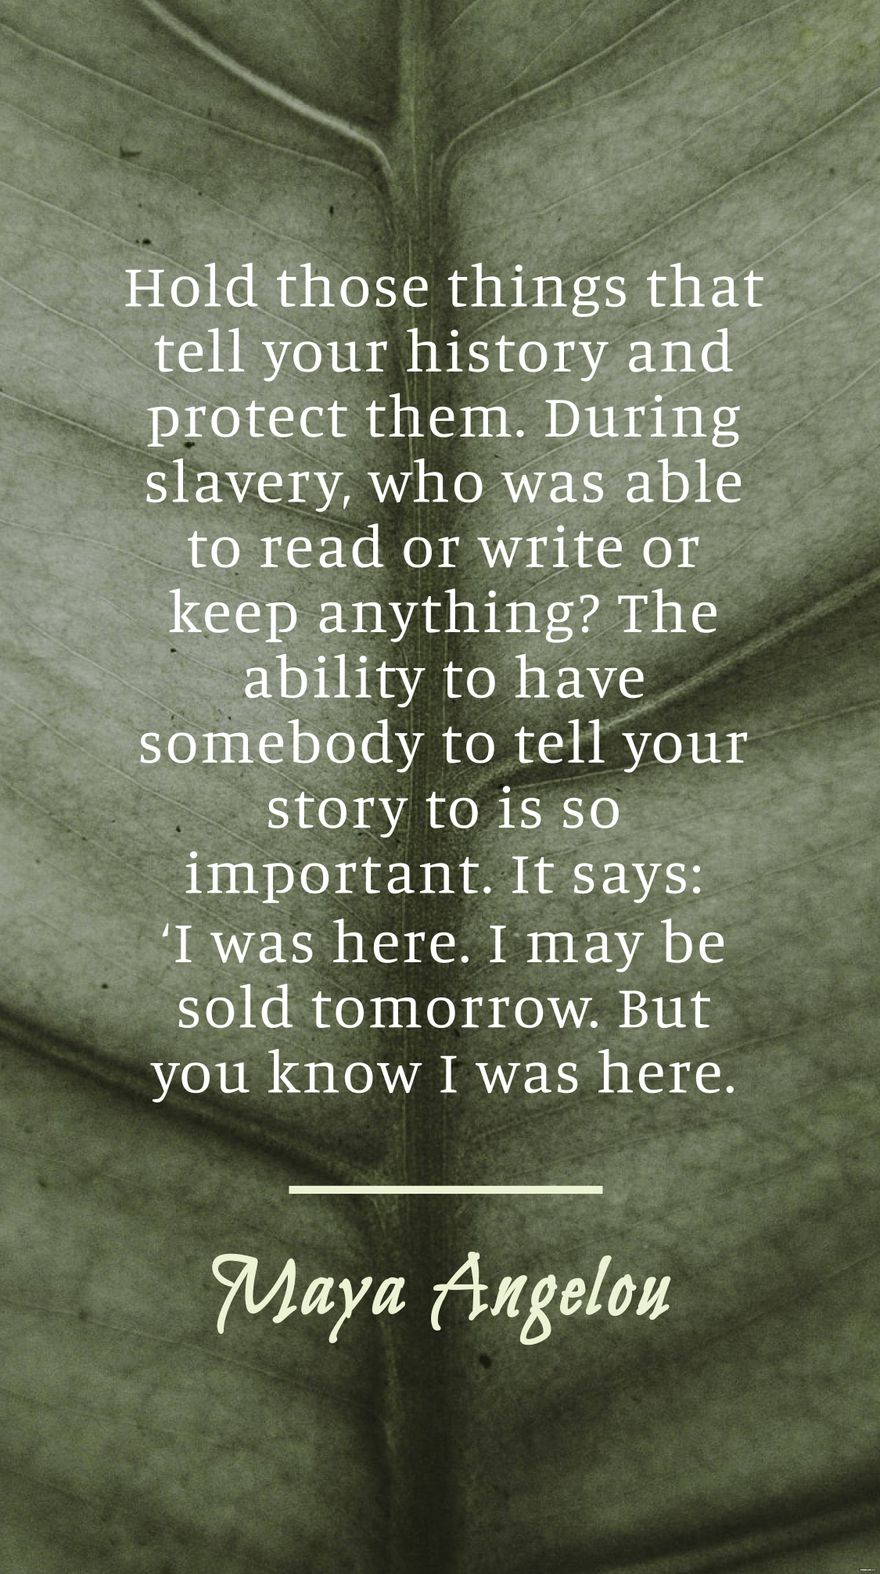 Maya Angelou - Hold those things that tell your history and protect them. During slavery, who was able to read or write or keep anything? The ability to have somebody to tell your story to is so impor